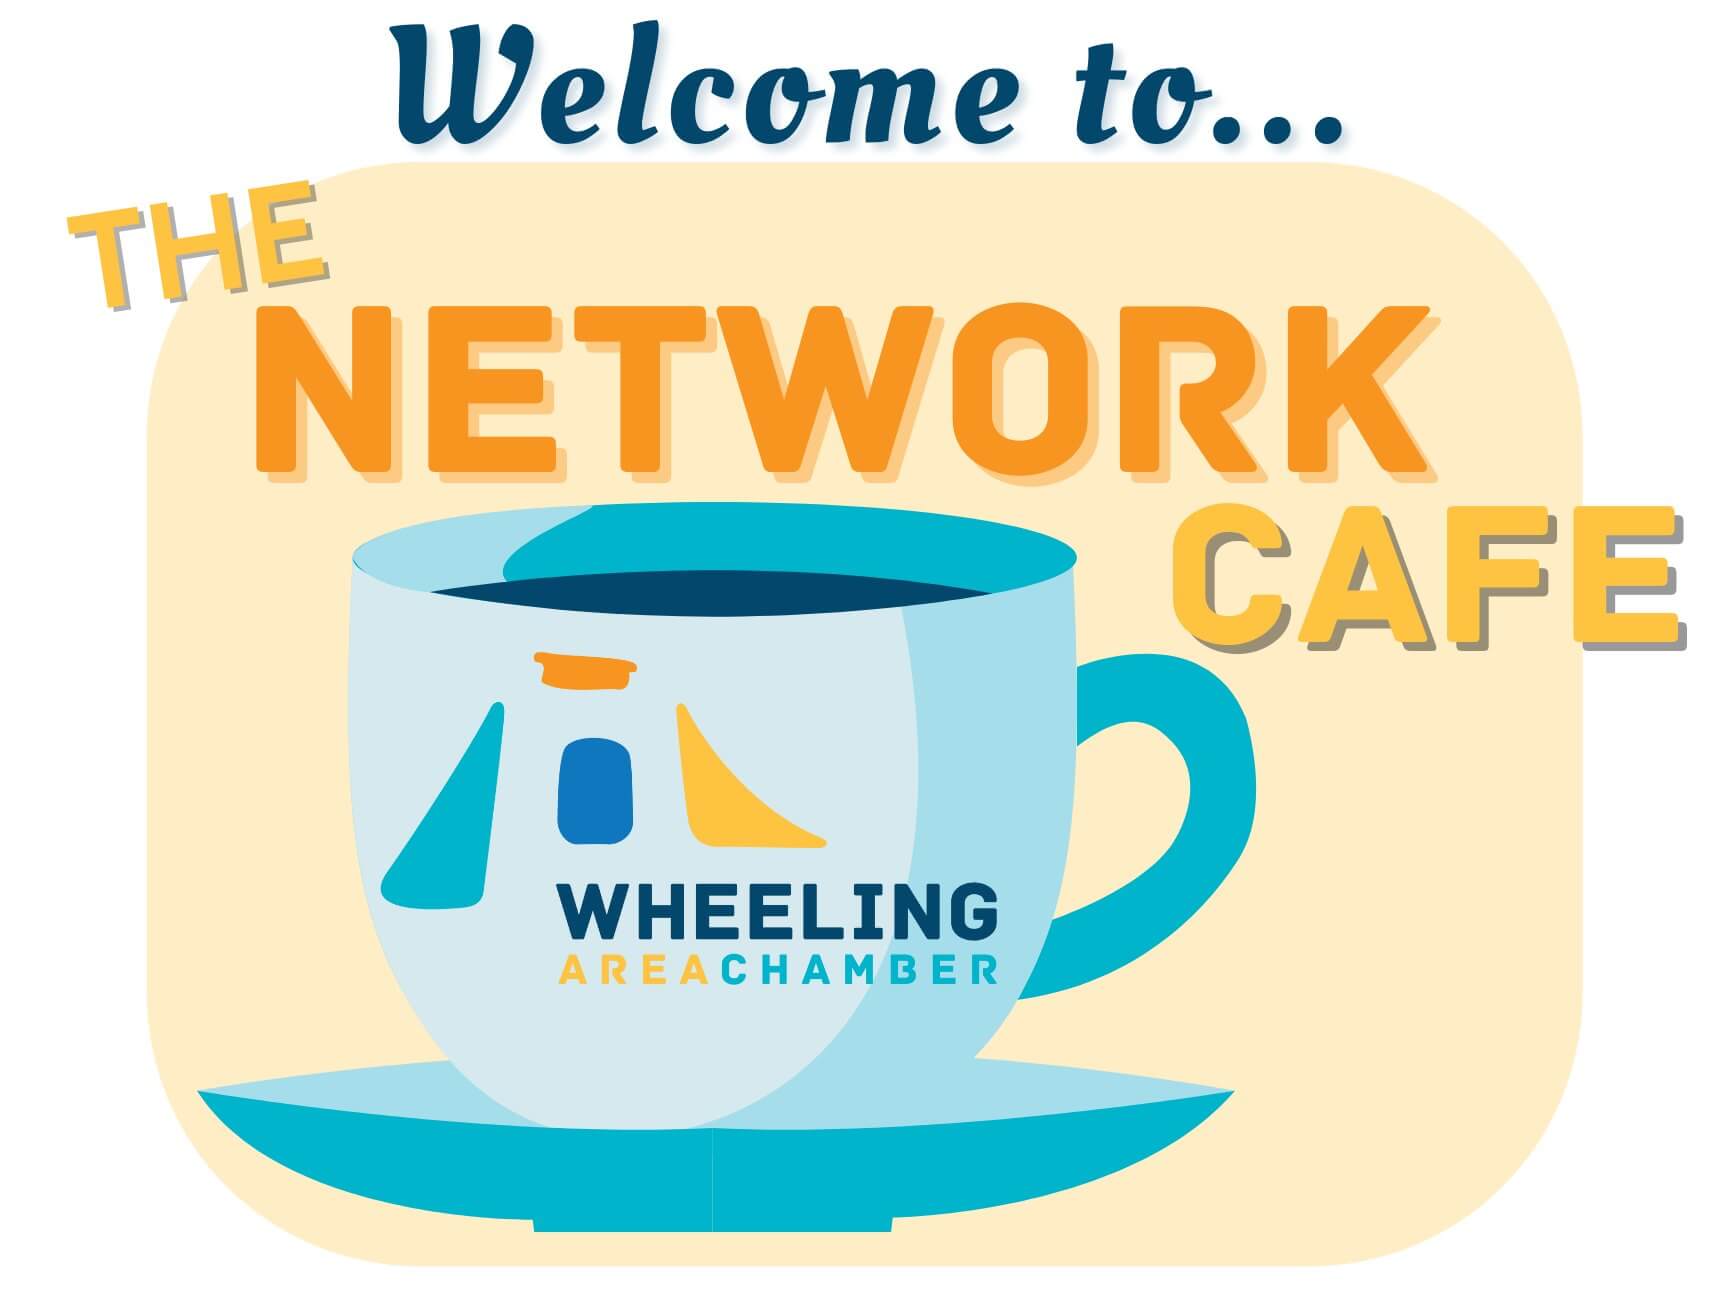 The Network Cafe